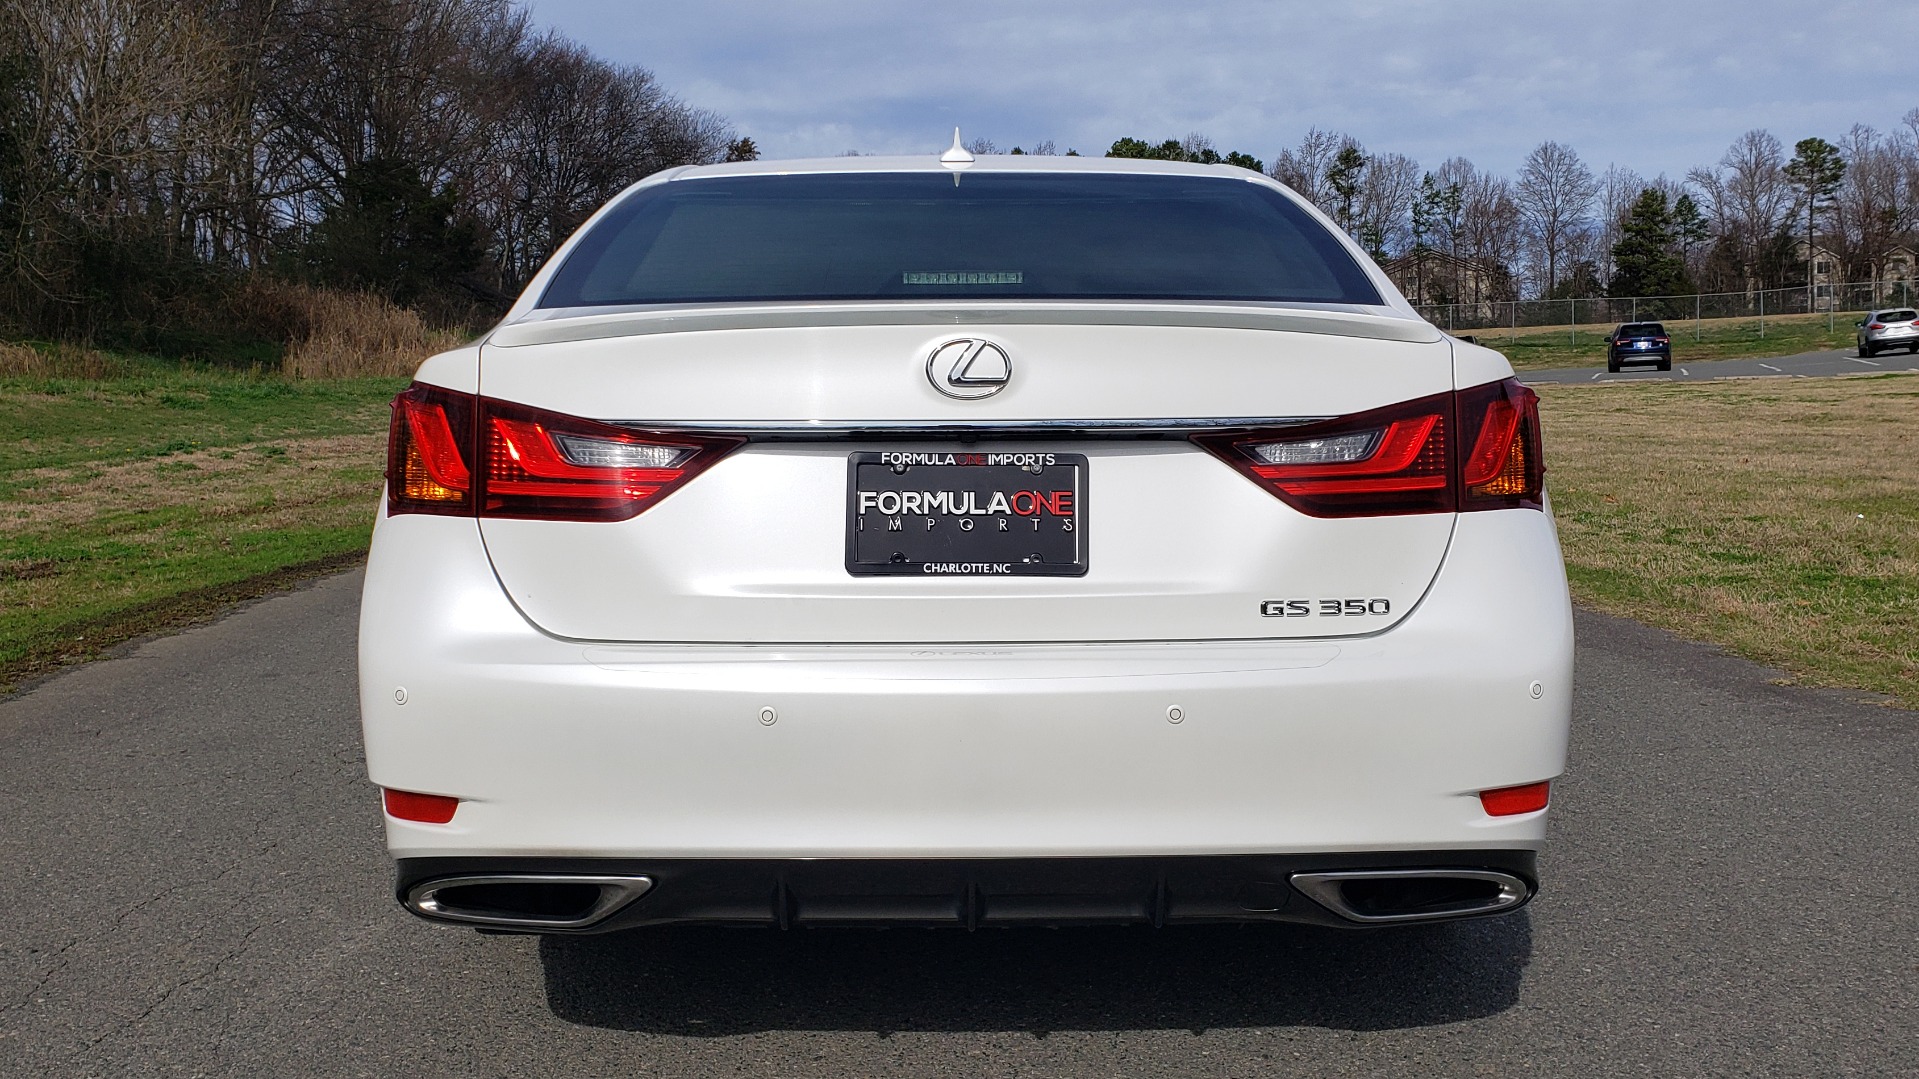 Used 2013 Lexus GS 350 F-SPORT / NAV / SUNROOF / BSM / PRK ASST / REARVIEW for sale Sold at Formula Imports in Charlotte NC 28227 22